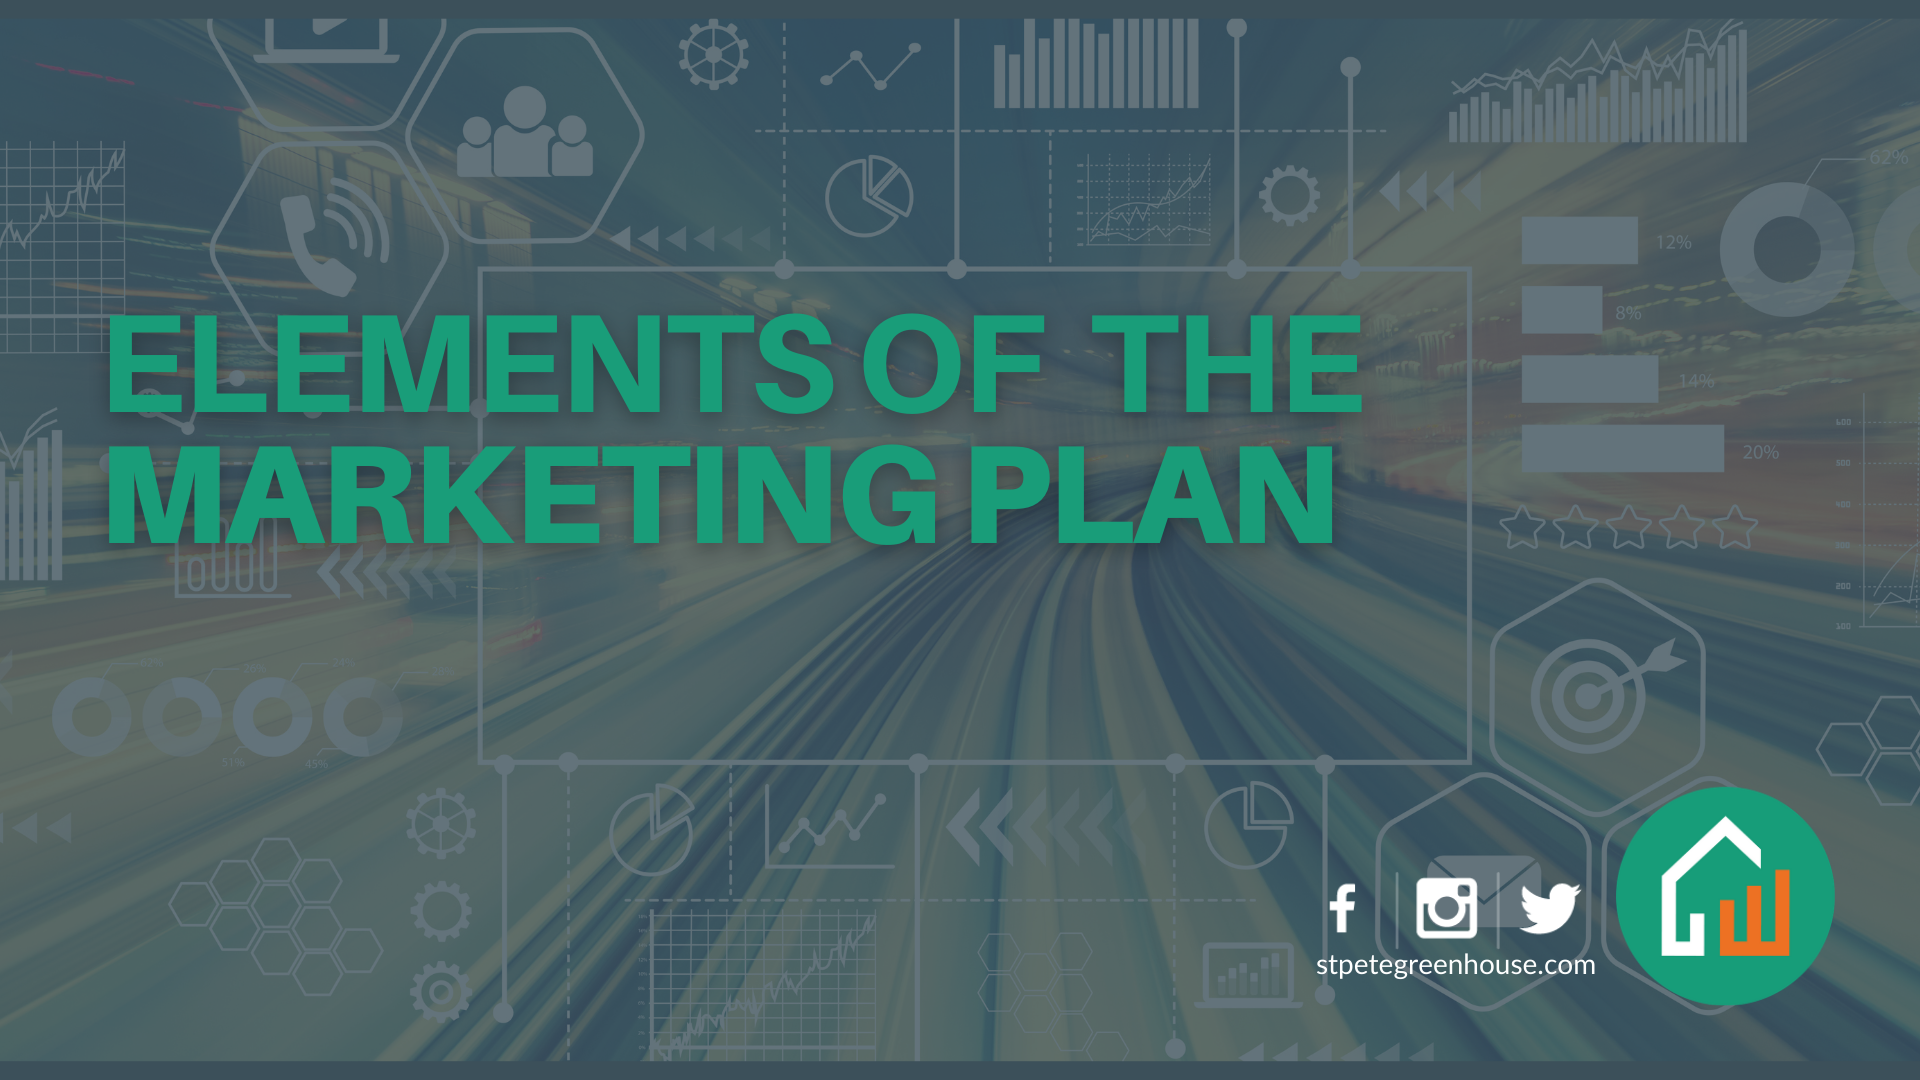 Elements of the Marketing Plan-image